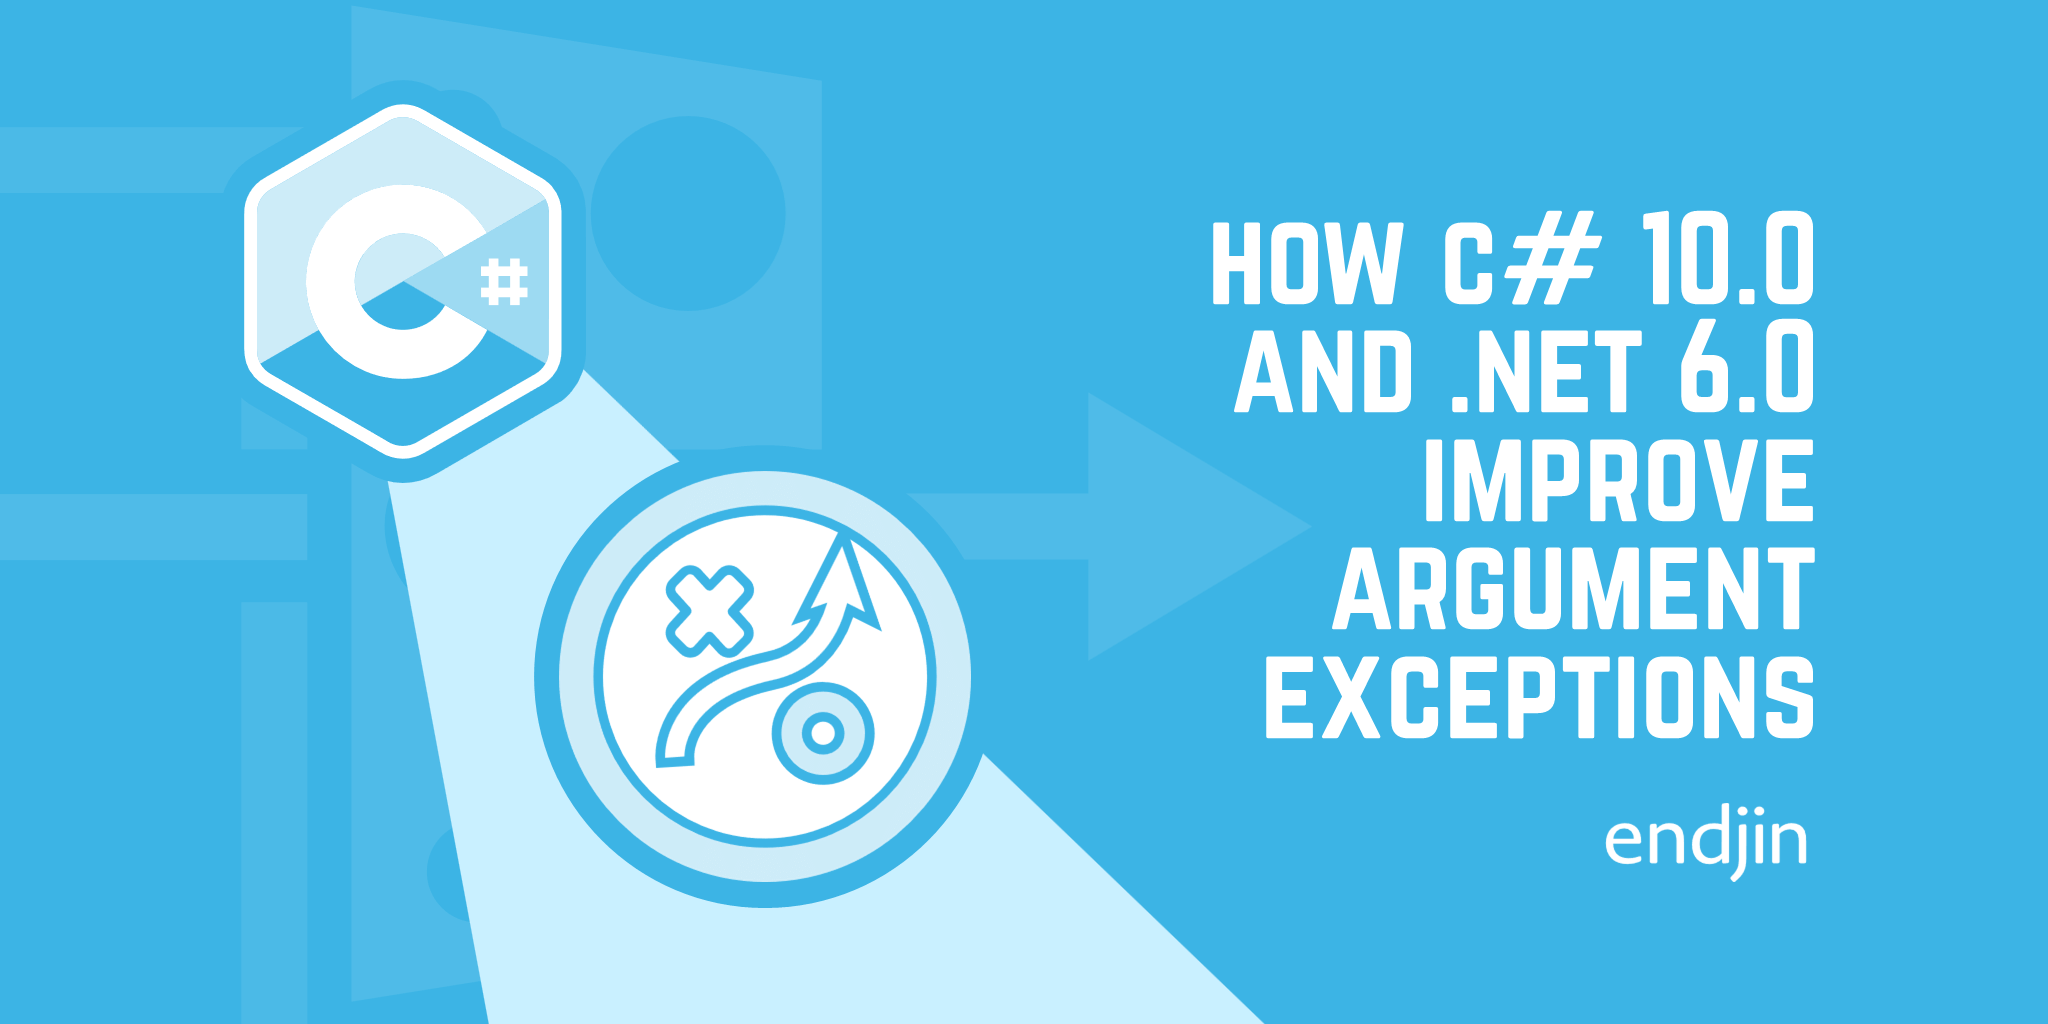 How C# 10.0 and .NET 6.0 improve ArgumentExceptions